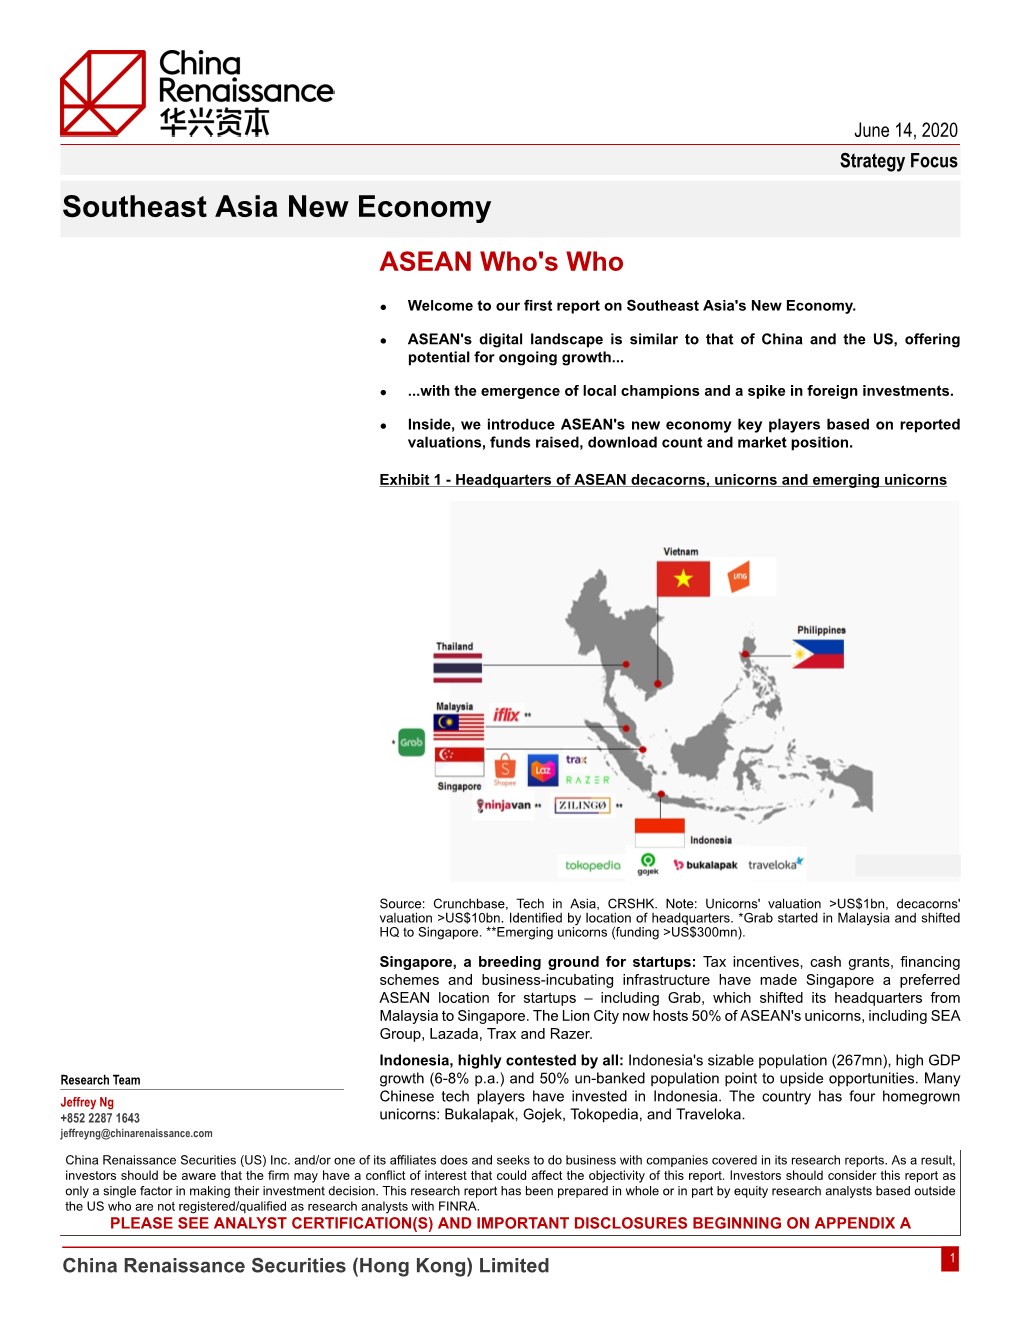 Southeast Asia New Economy ASEAN Who's Who • Welcome to Our First Report on Southeast Asia's New Economy